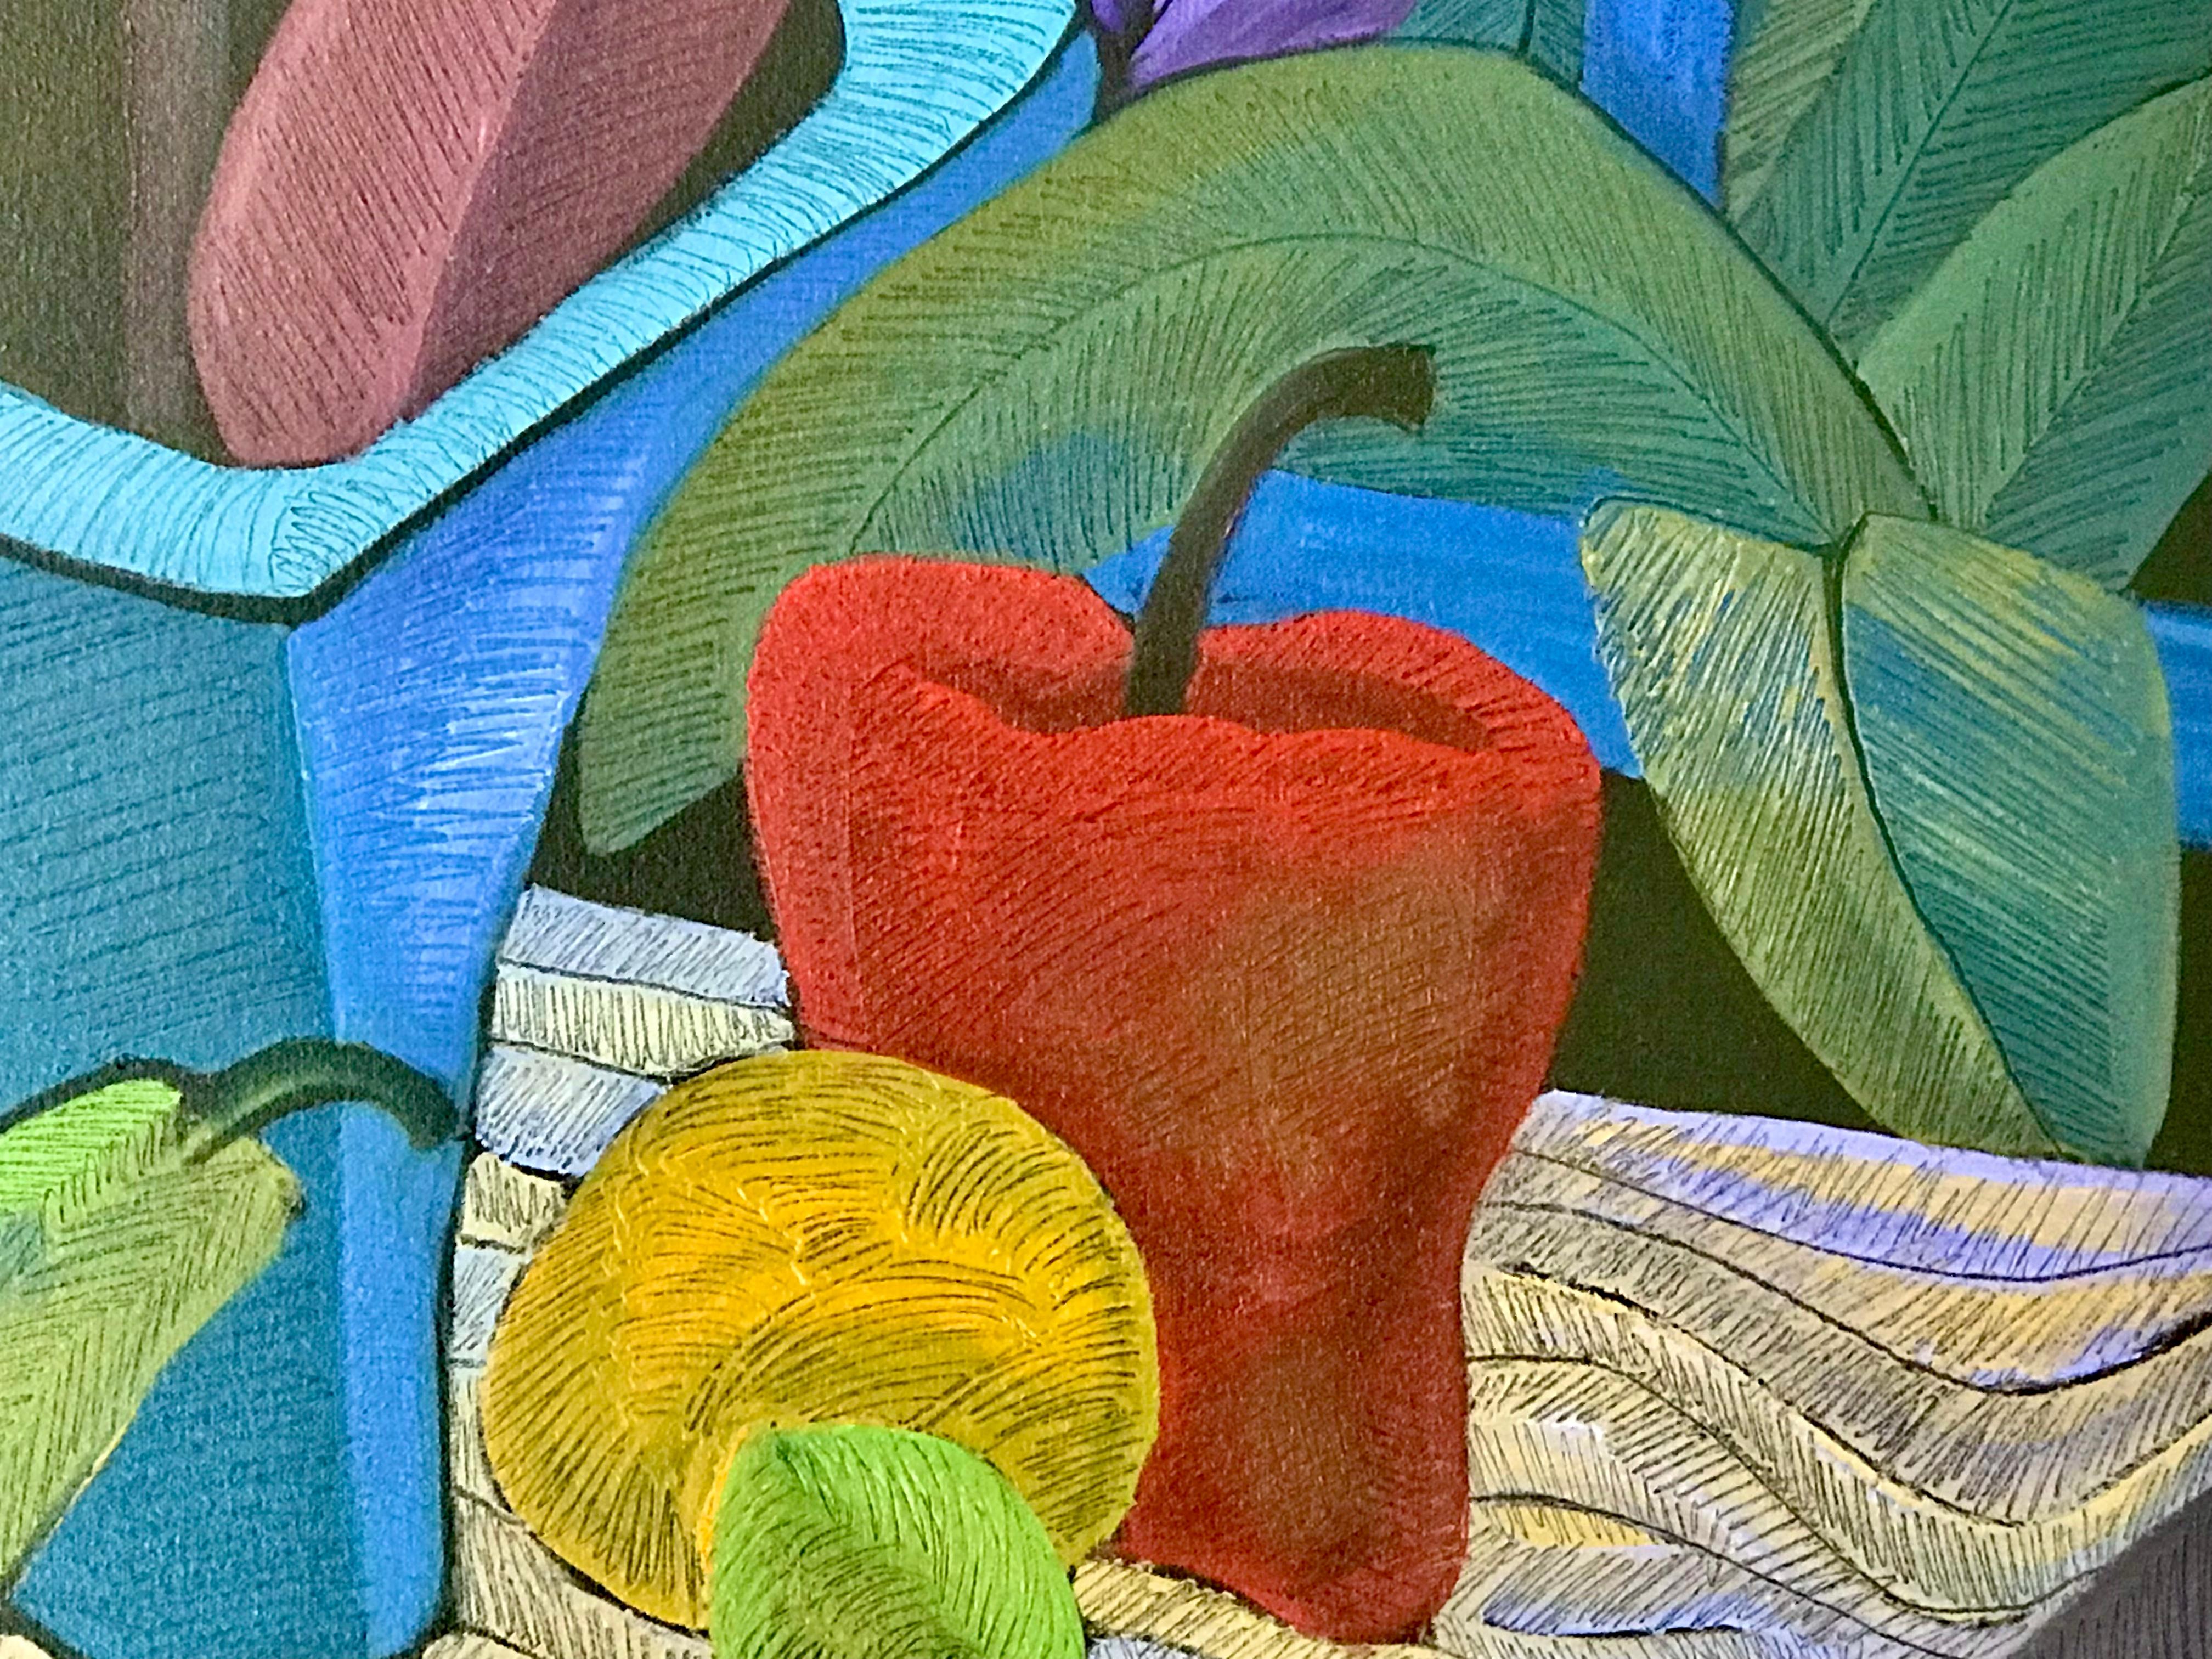 Stillife with a vase with bold flowers, fruit and a purple jug all highly textured. Behind growing through the window are wild plants The red apple matches the chair giving a strong contrast to the greens.

Still life with Aggressive Jungle Still